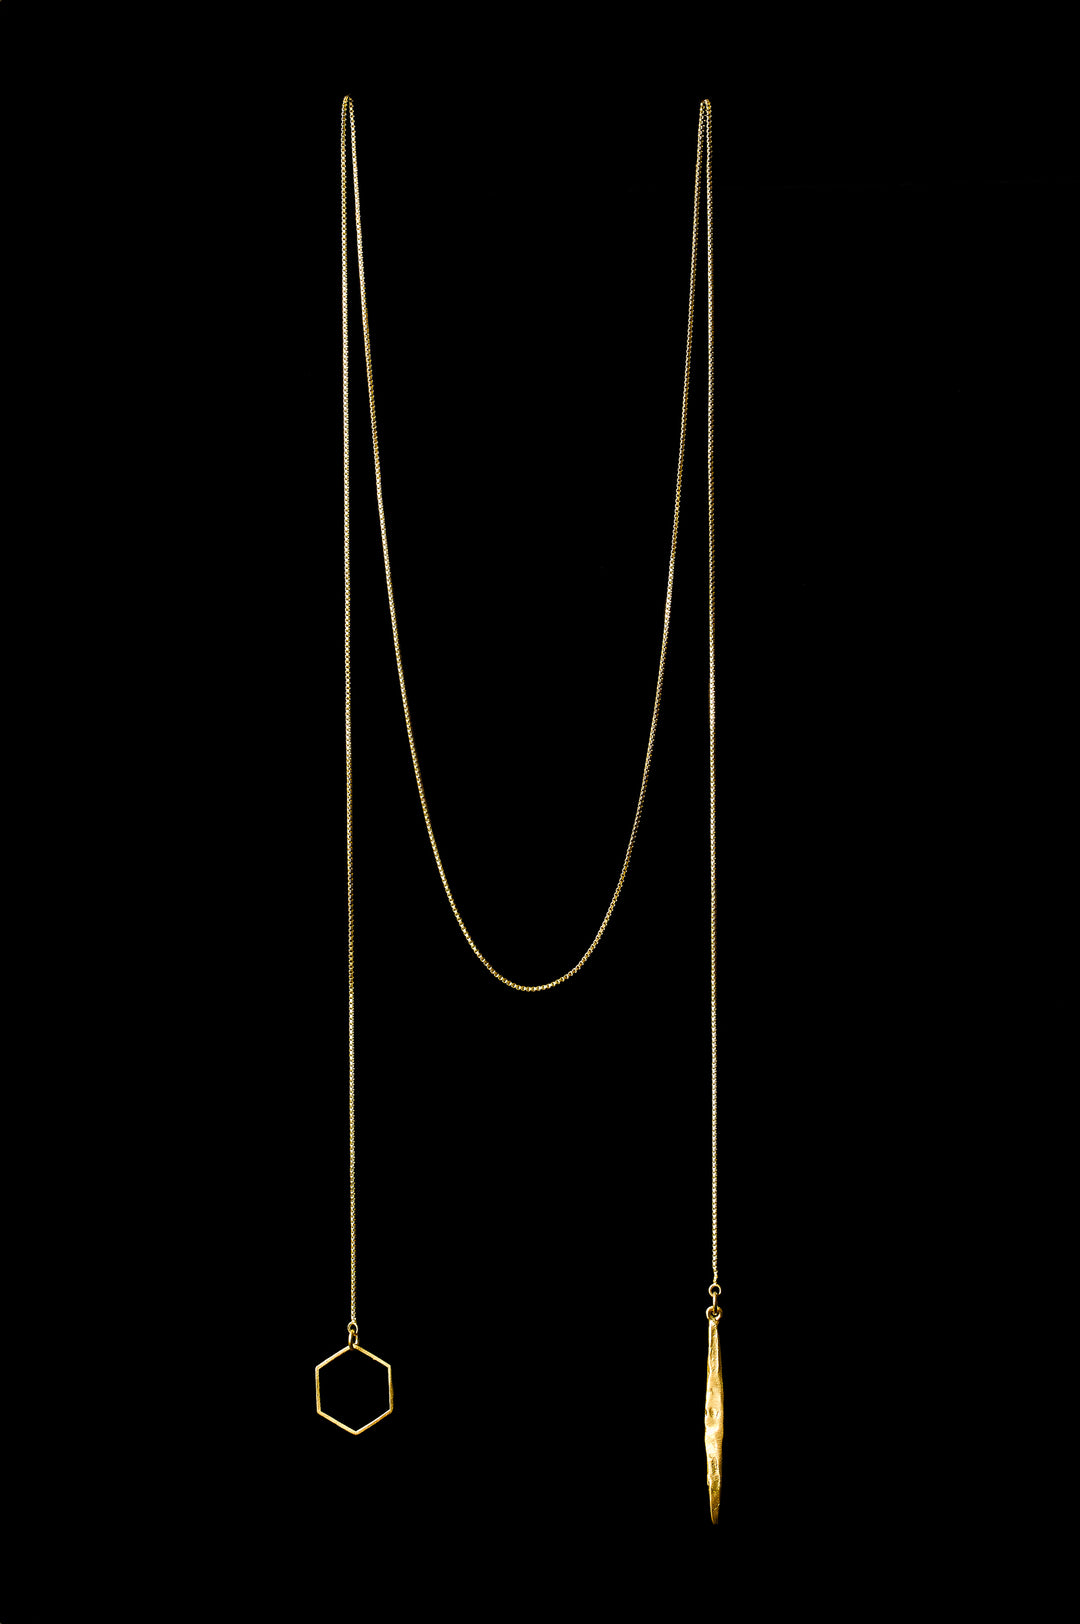 Necklace - Sustainable “Melissa” Lariat Necklace